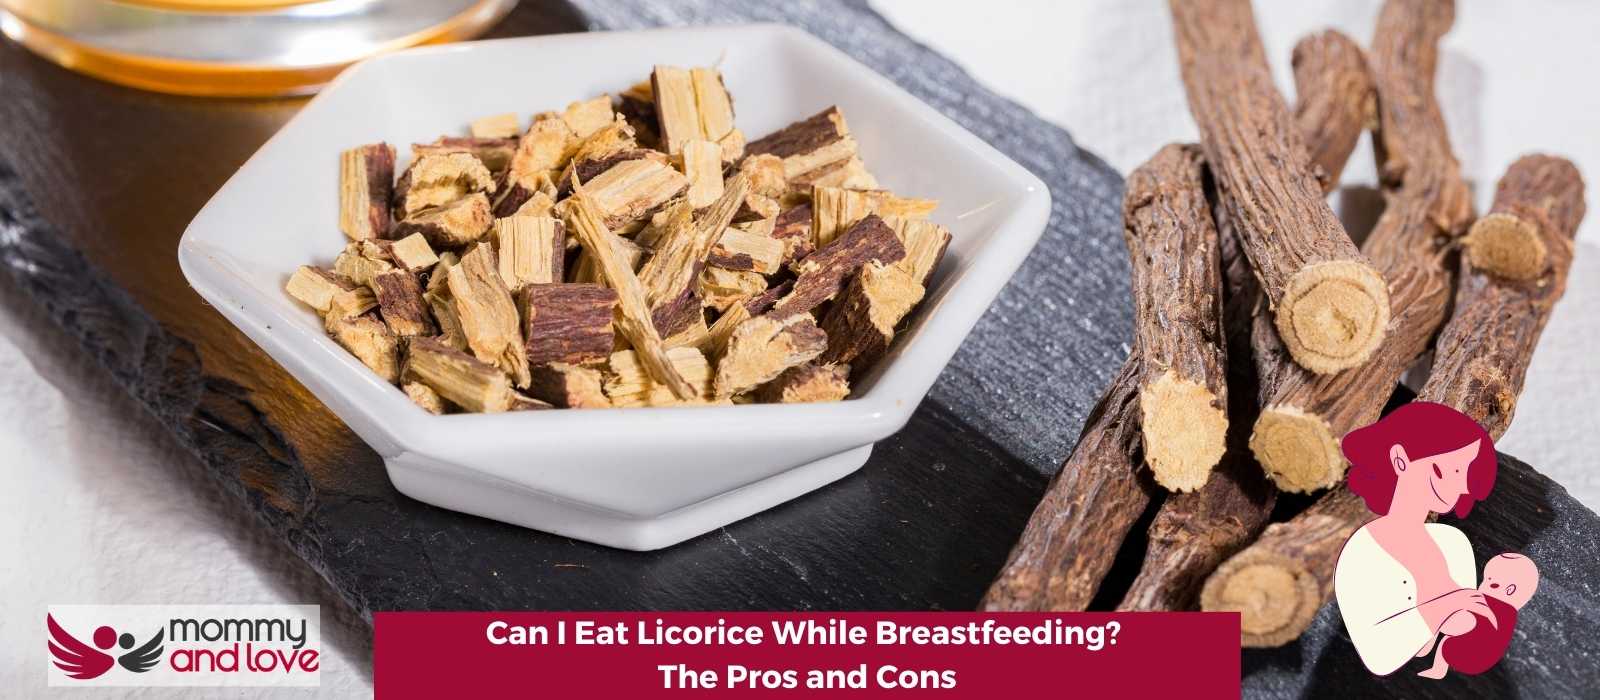 Can I Eat Licorice While Breastfeeding? The Pros and Cons